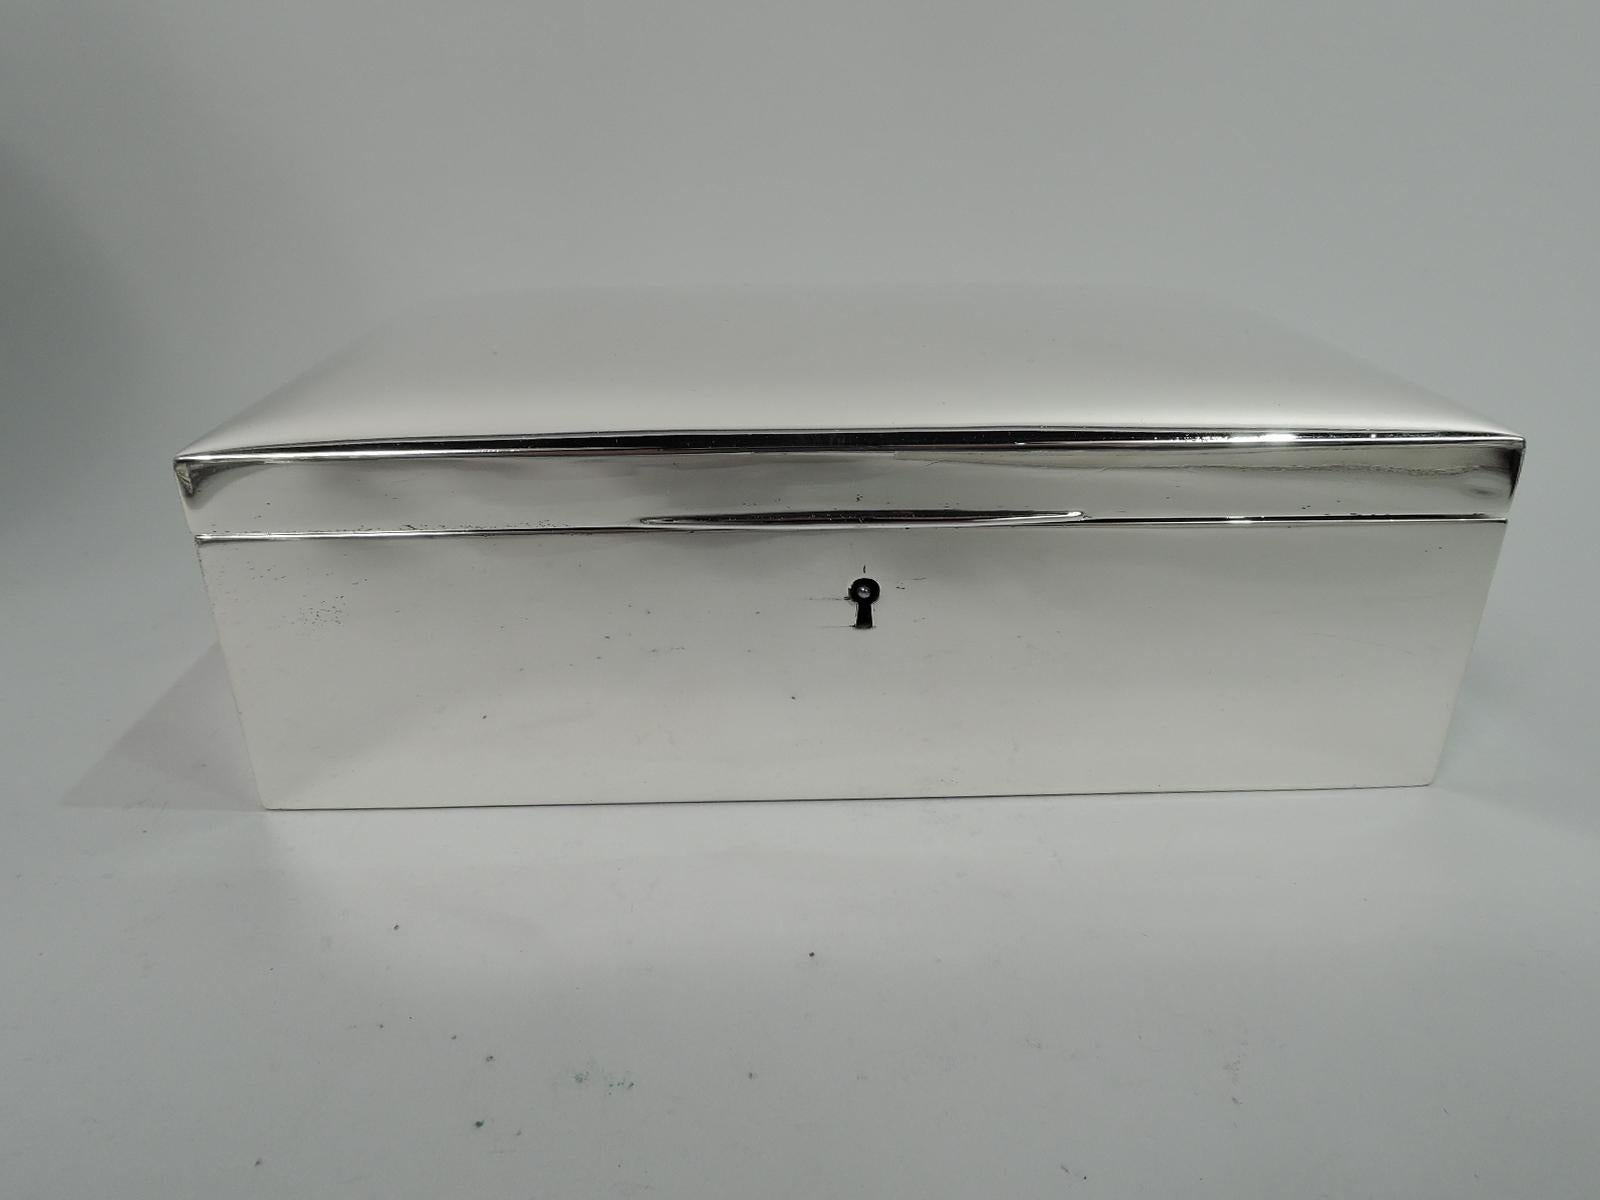 Modern sterling silver keepsake jewelry box, ca 1920. Retailed by Tiffany & Co. in New York. Rectangular with straight sides. Cover hinged with gently curved top and tapering tab. Box and cover interior velvet lined. With key. Marked “Tiffany & Co.